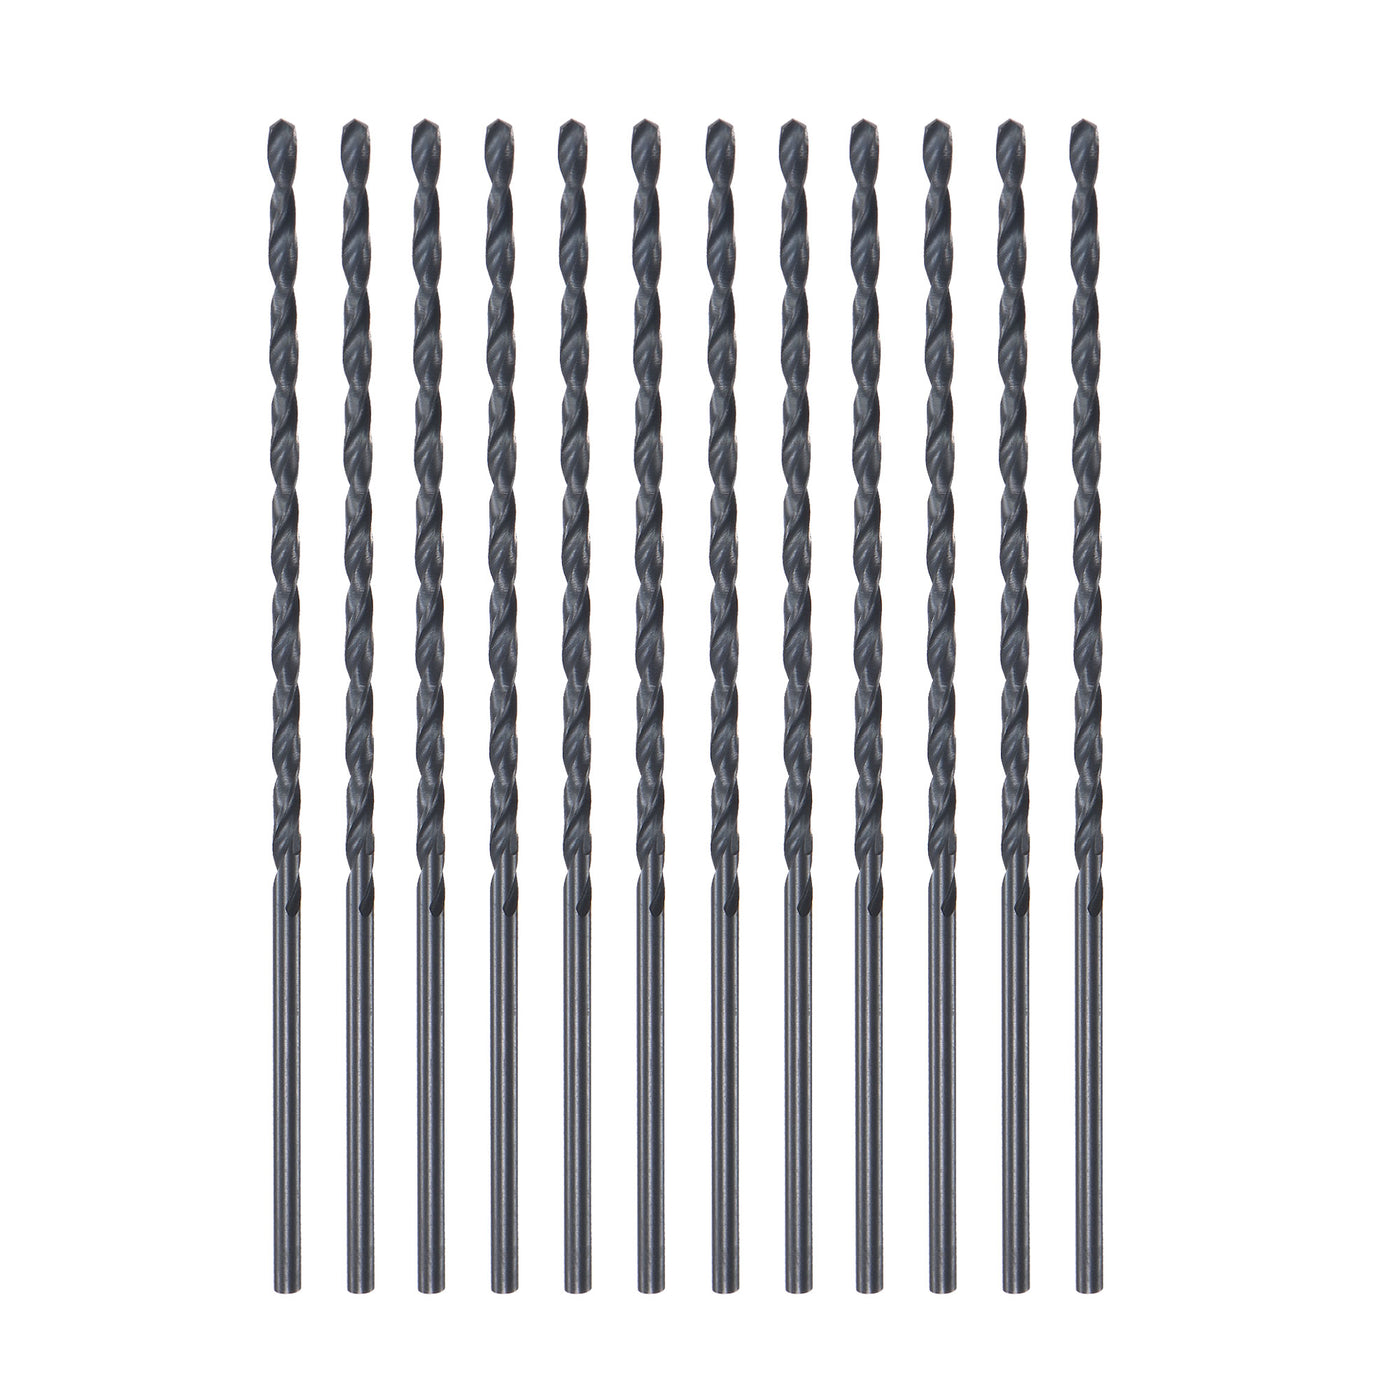 uxcell Uxcell High Speed Steel Lengthen Twist Drill Bit 2mm Fully Ground Black Oxide 12Pcs